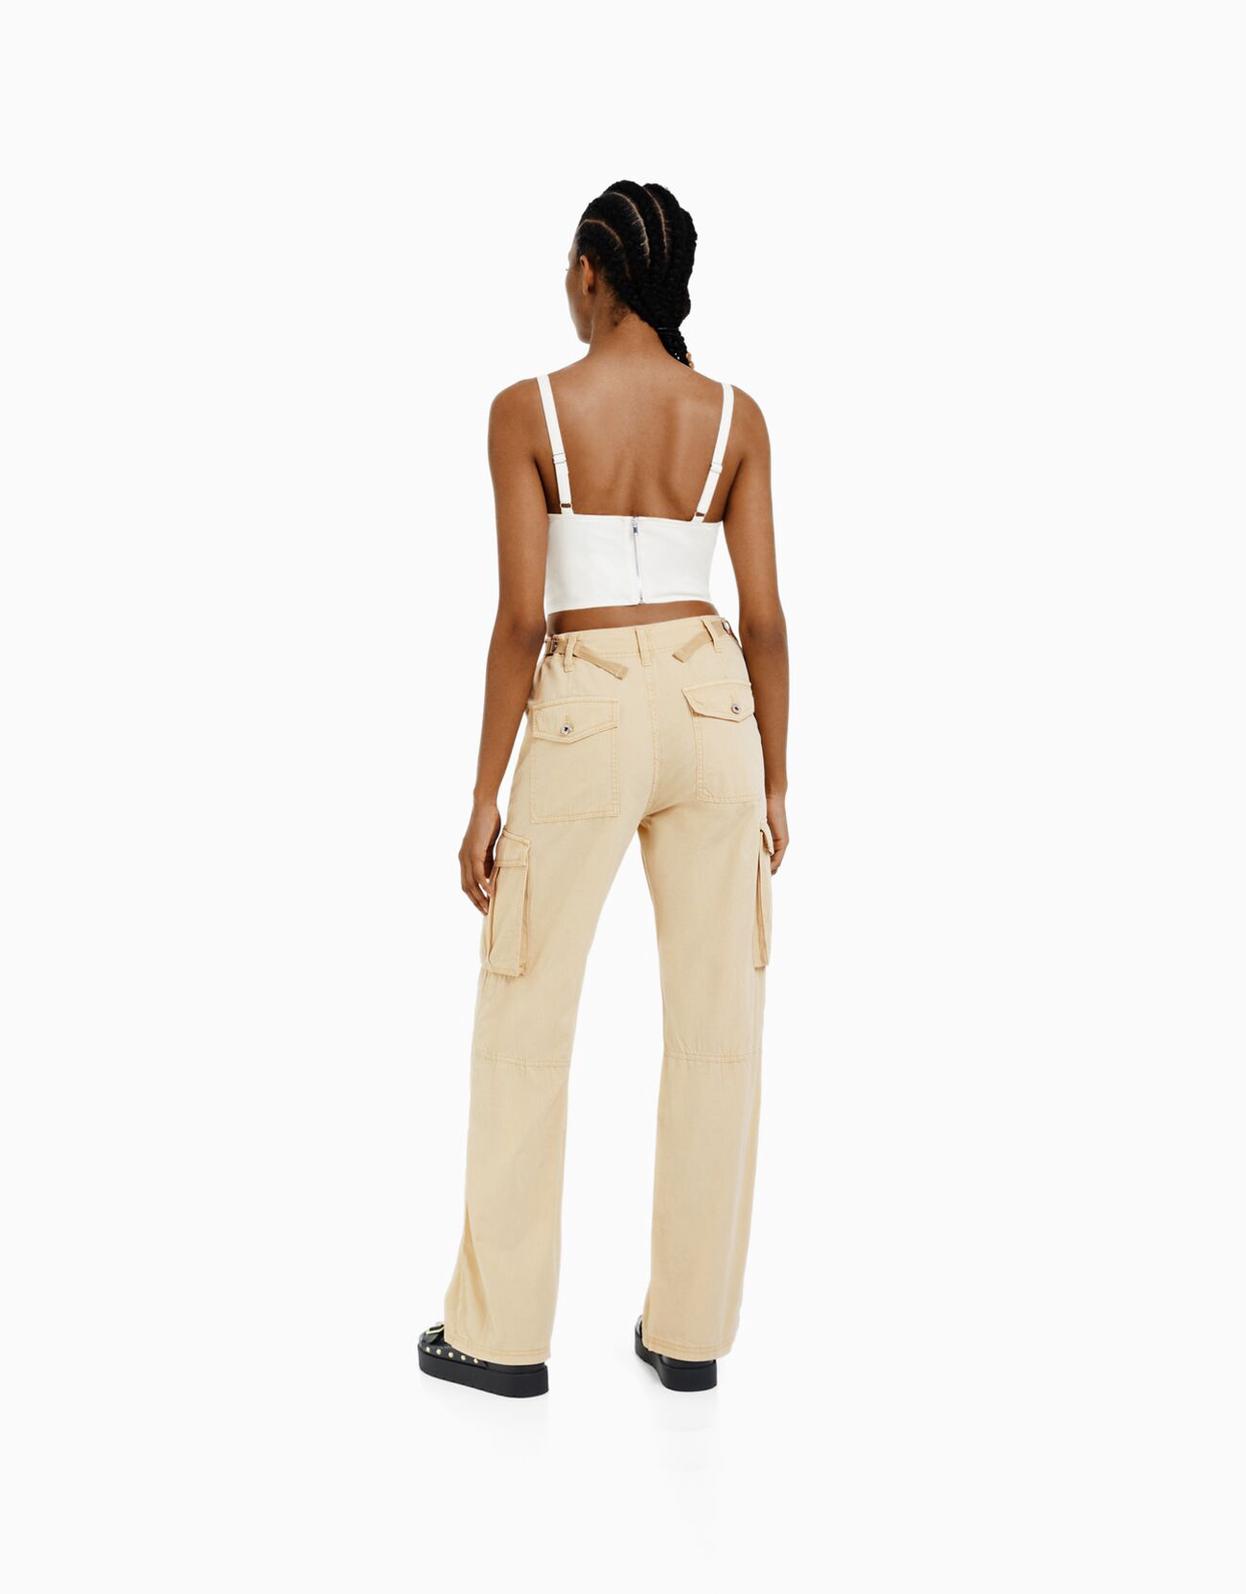 Adjustable Straight Fit Cargo Pants(Buy 2 Free Shipping)